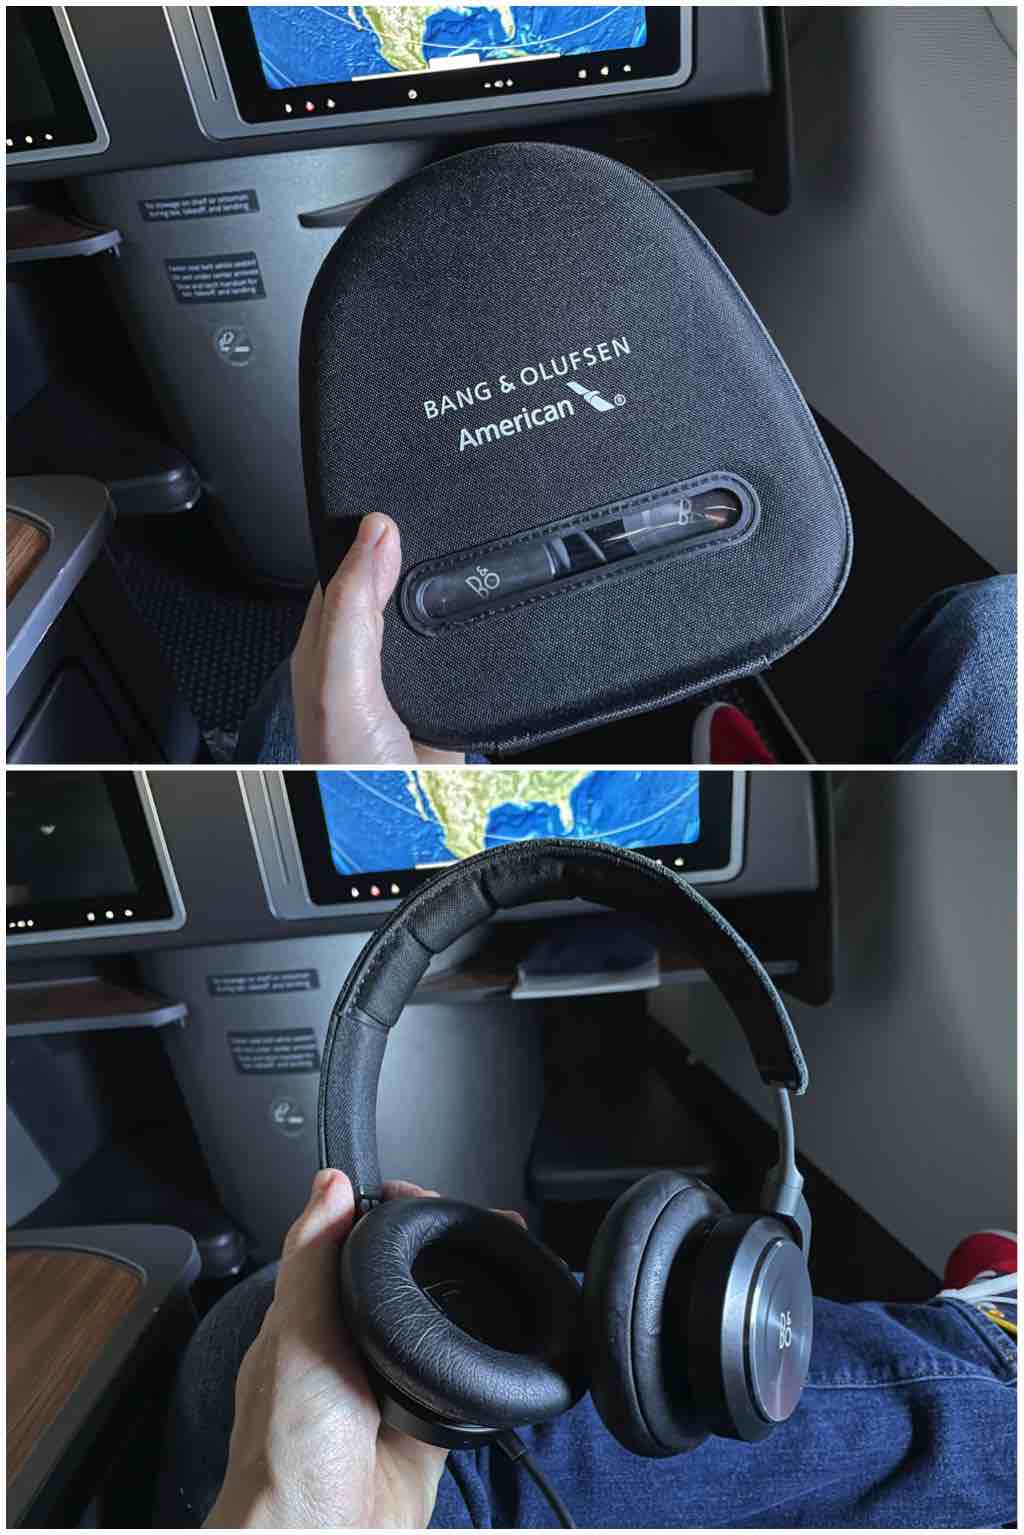 American Airlines flagship business class Bang & Olufsen noise canceling headphones